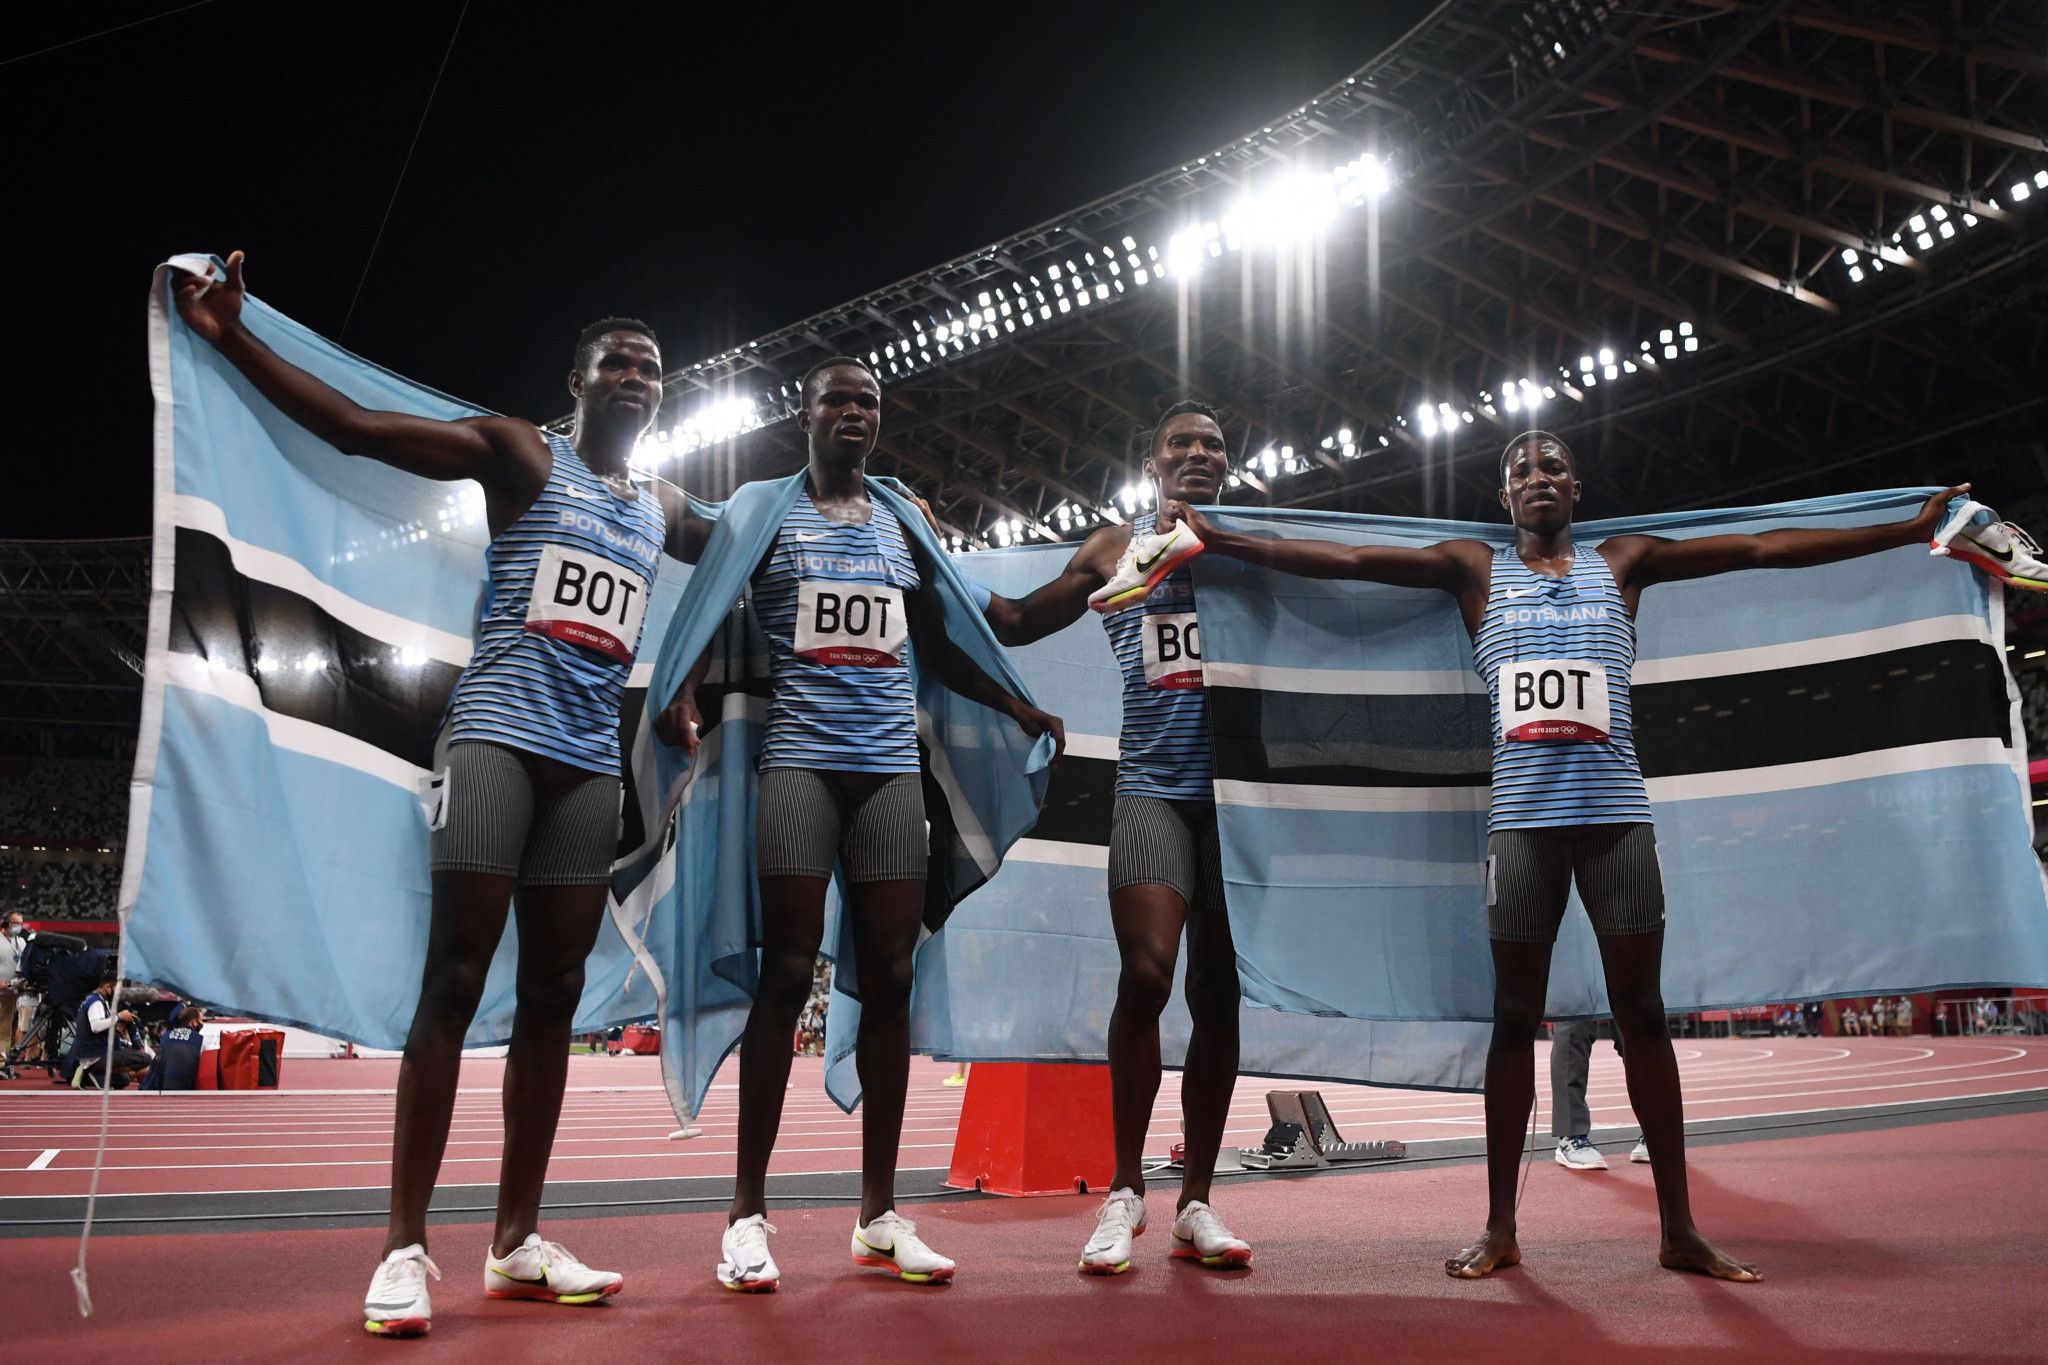 Botswana has established itself as a major nation in the 400m, winning three golds at Gold Coast 2018 and Olympic bronze at Tokyo 2020, pictured ©Getty Images